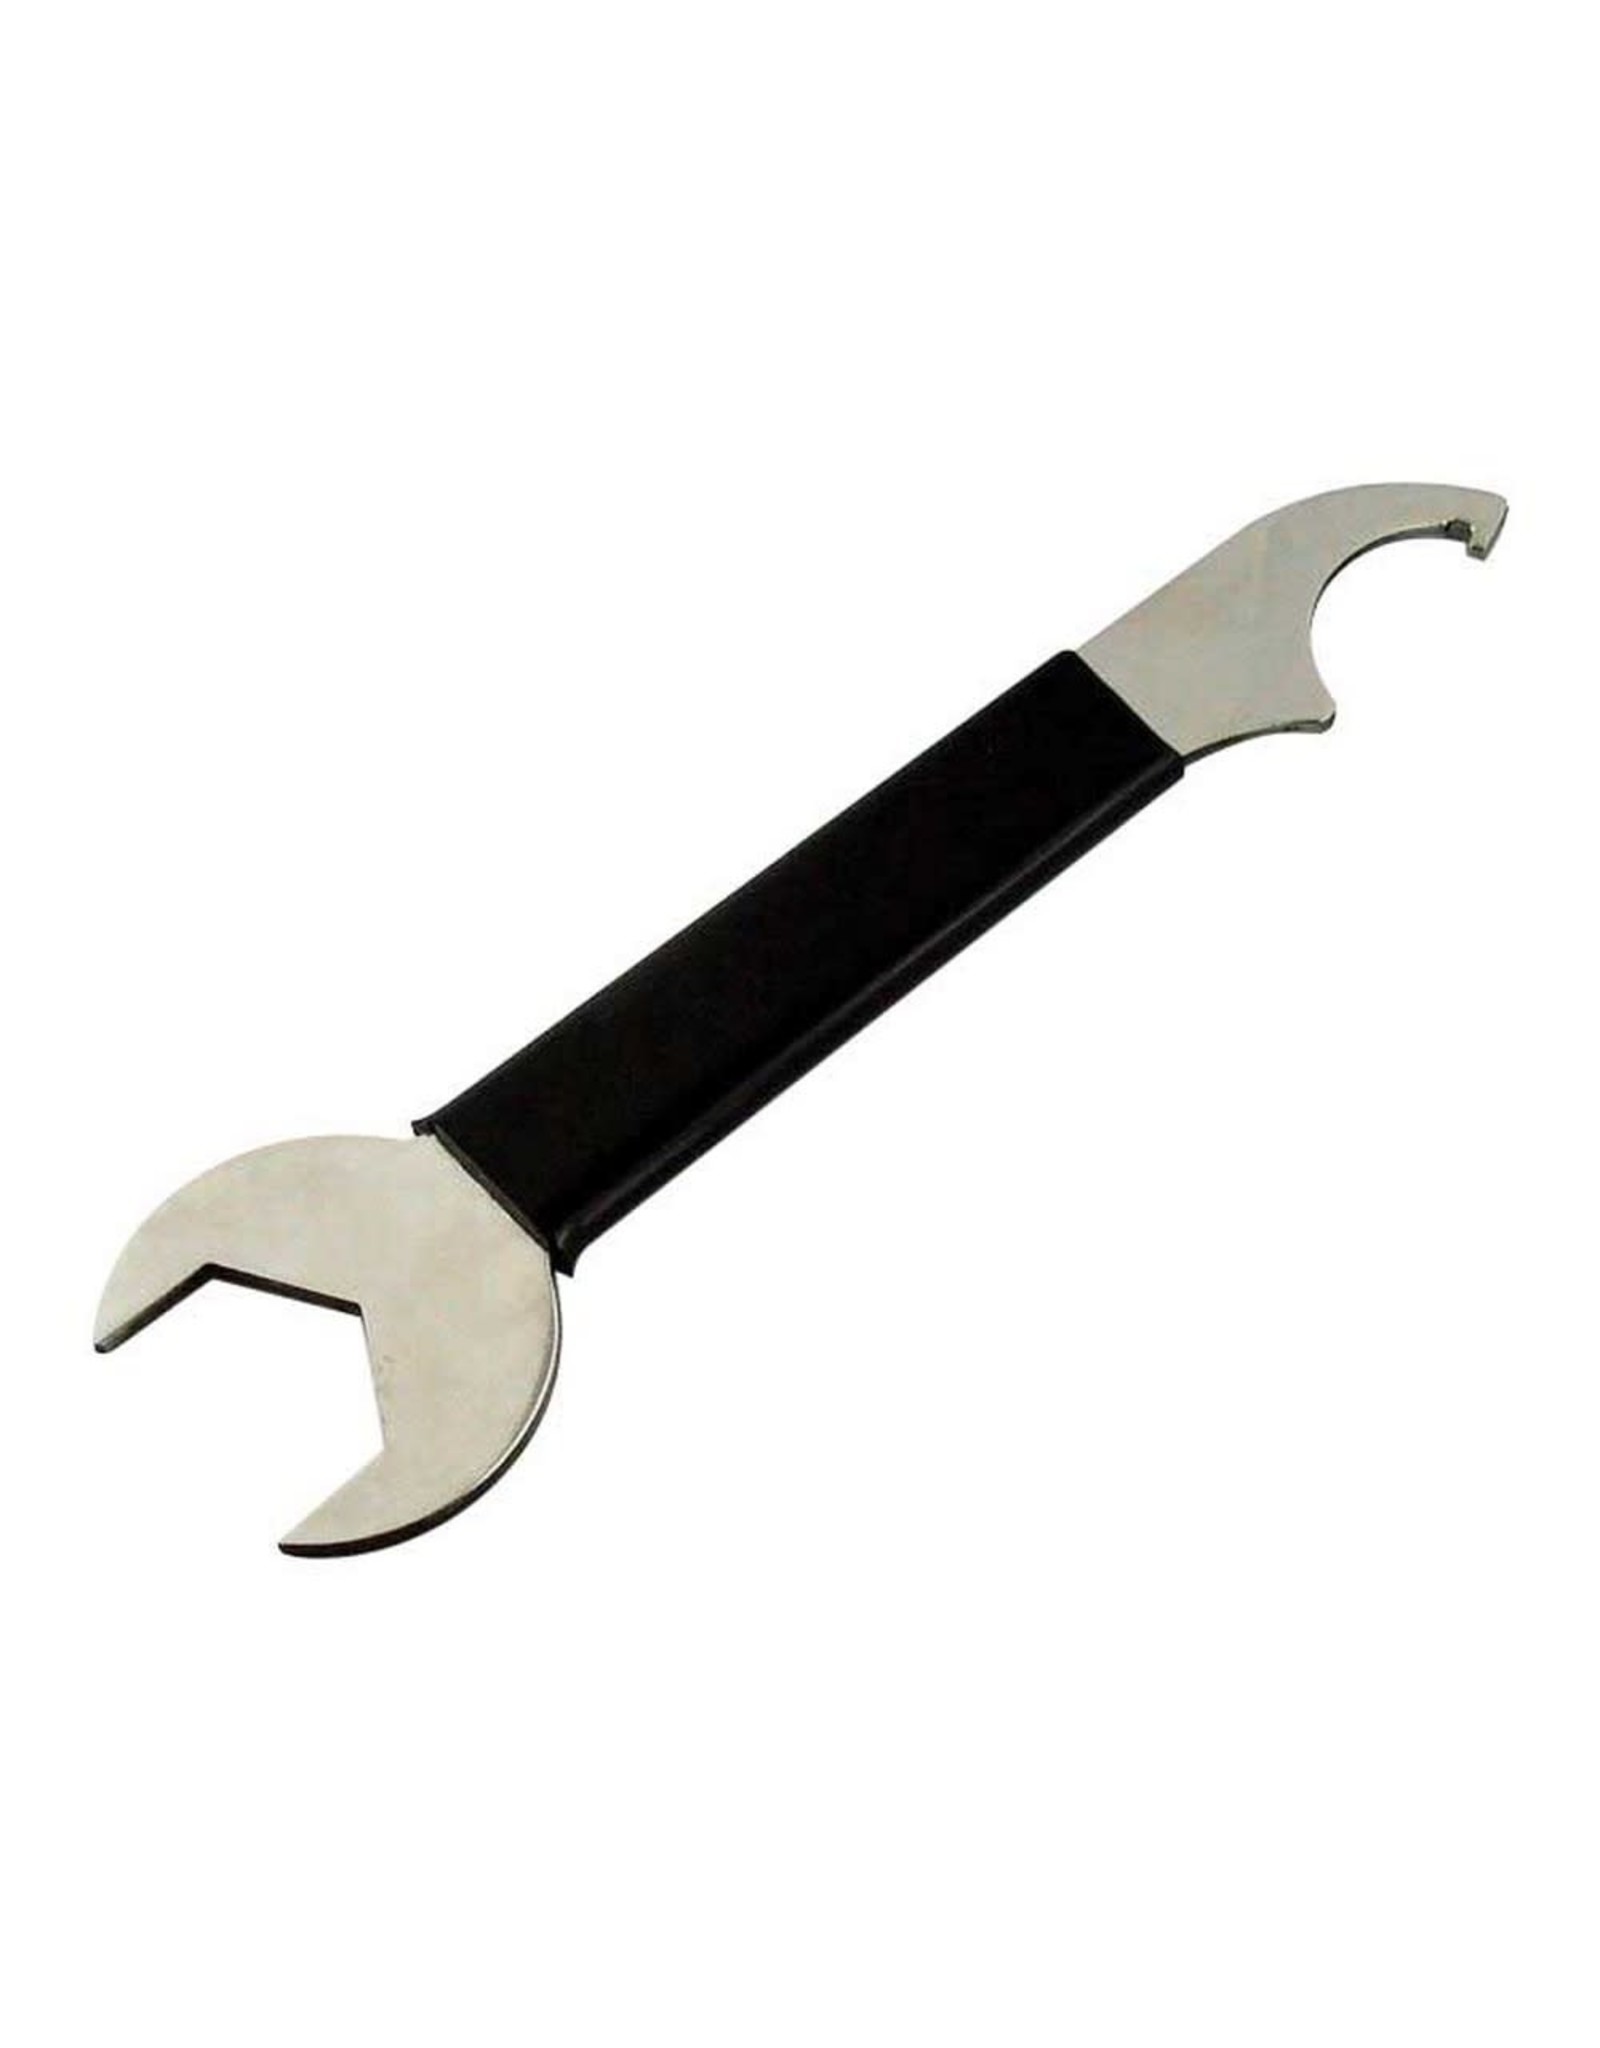 Faucet wrench Black Handle Combo Wrench